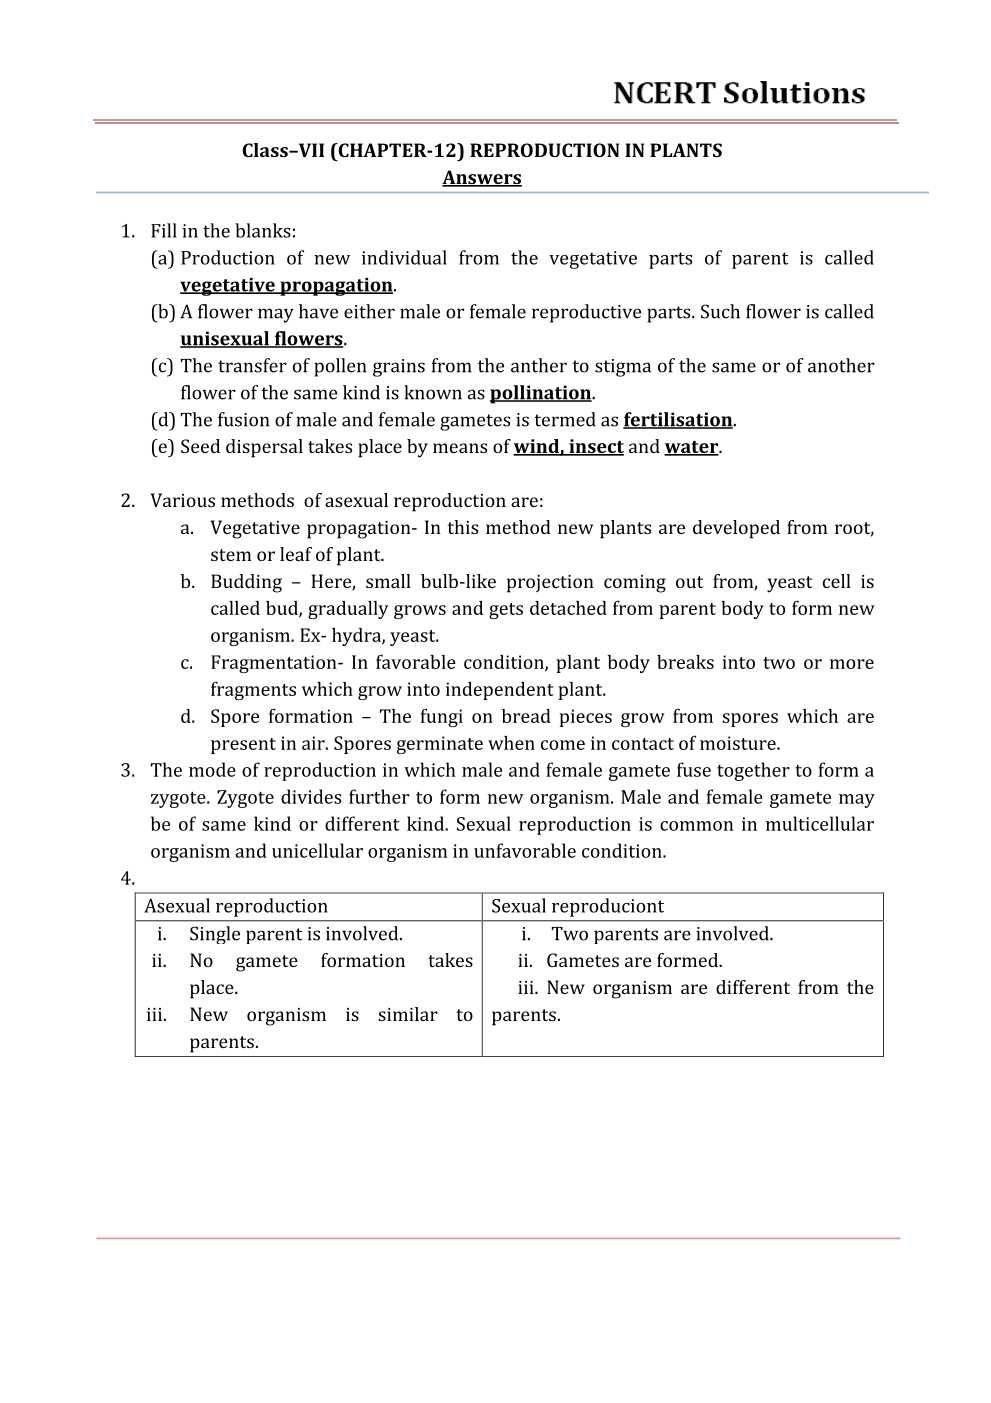 NCERT Solutions For Class 7 science Chapter 12 Reproduction in Plants